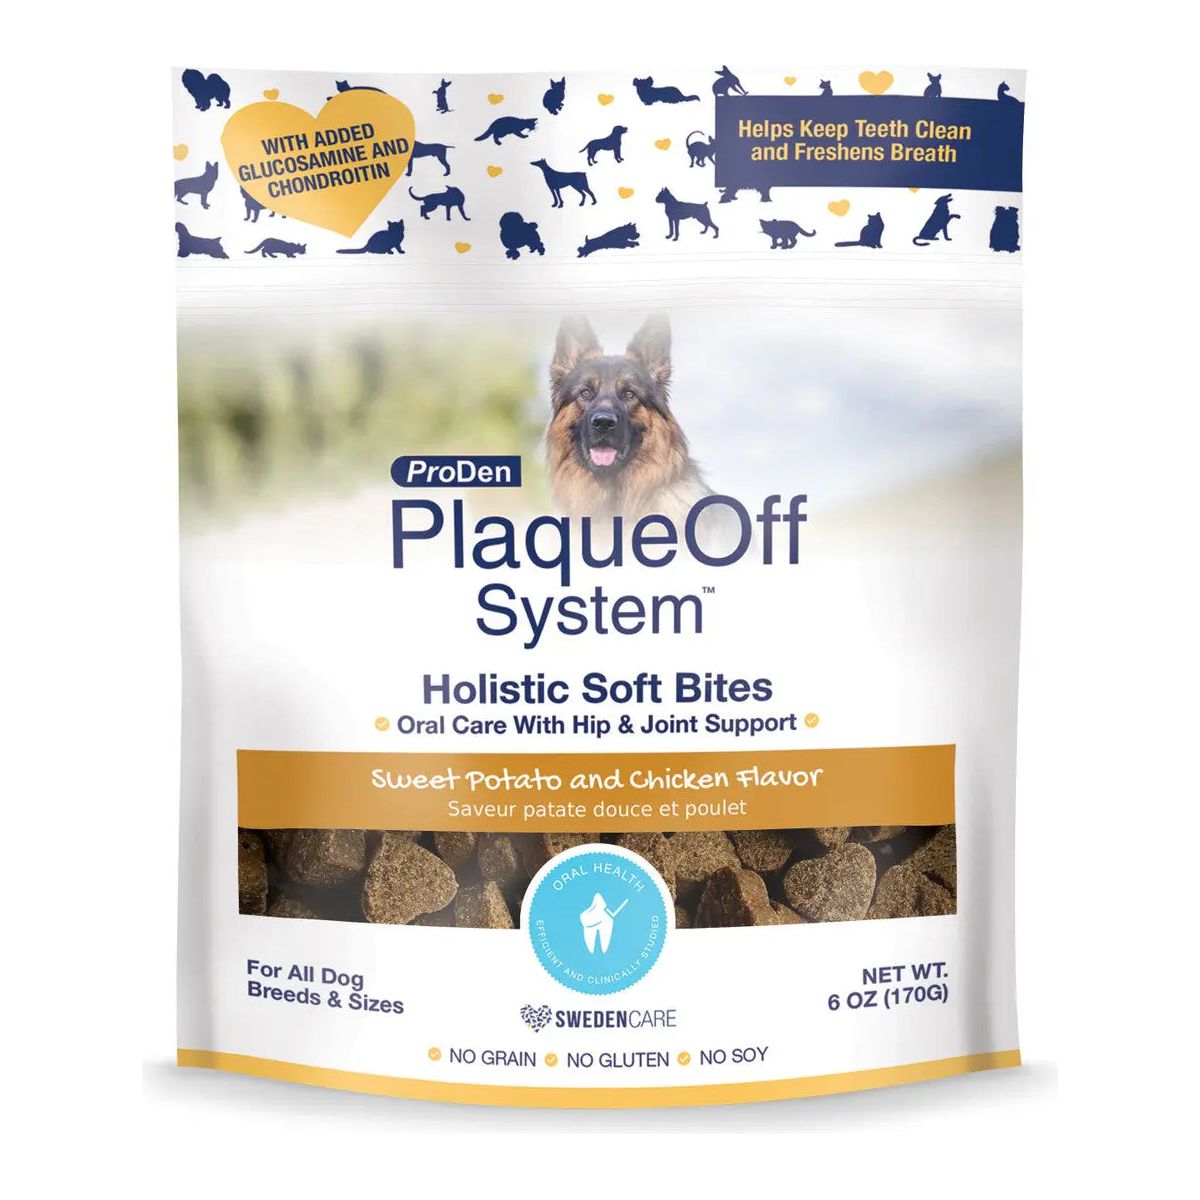 PlaqueOff Holistic Soft Bites Oral Care with Hip & Joint PlaqueOff